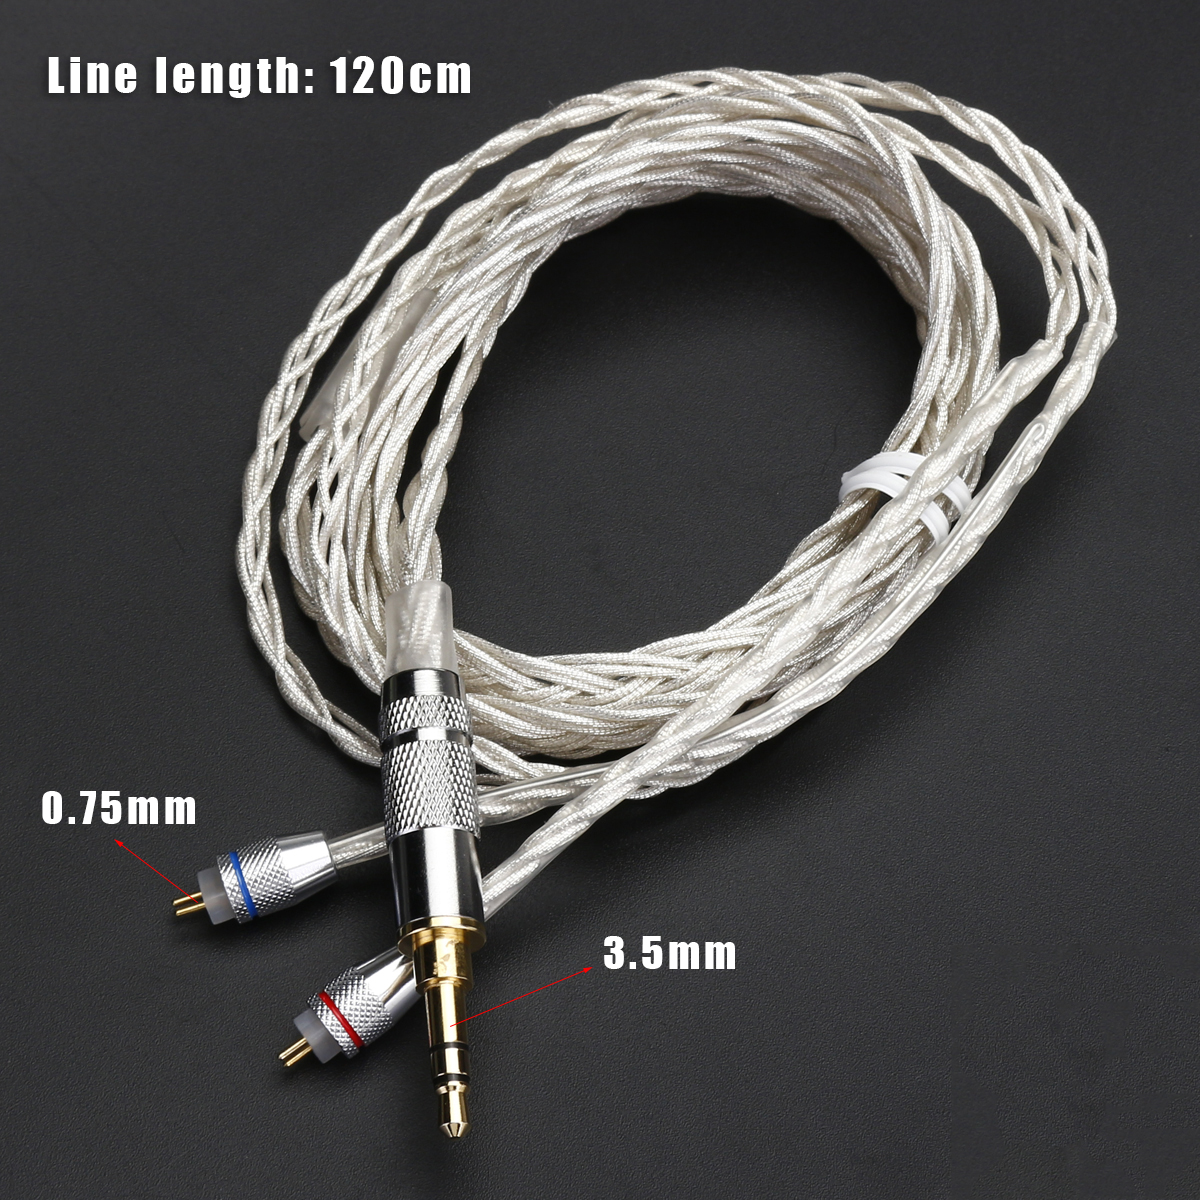 075mm-Insert-Needle-Braided-Headphone-Cable-Earphone-Wire-For-KZ-ZSTZSRES3ED12-Earphone-1389942